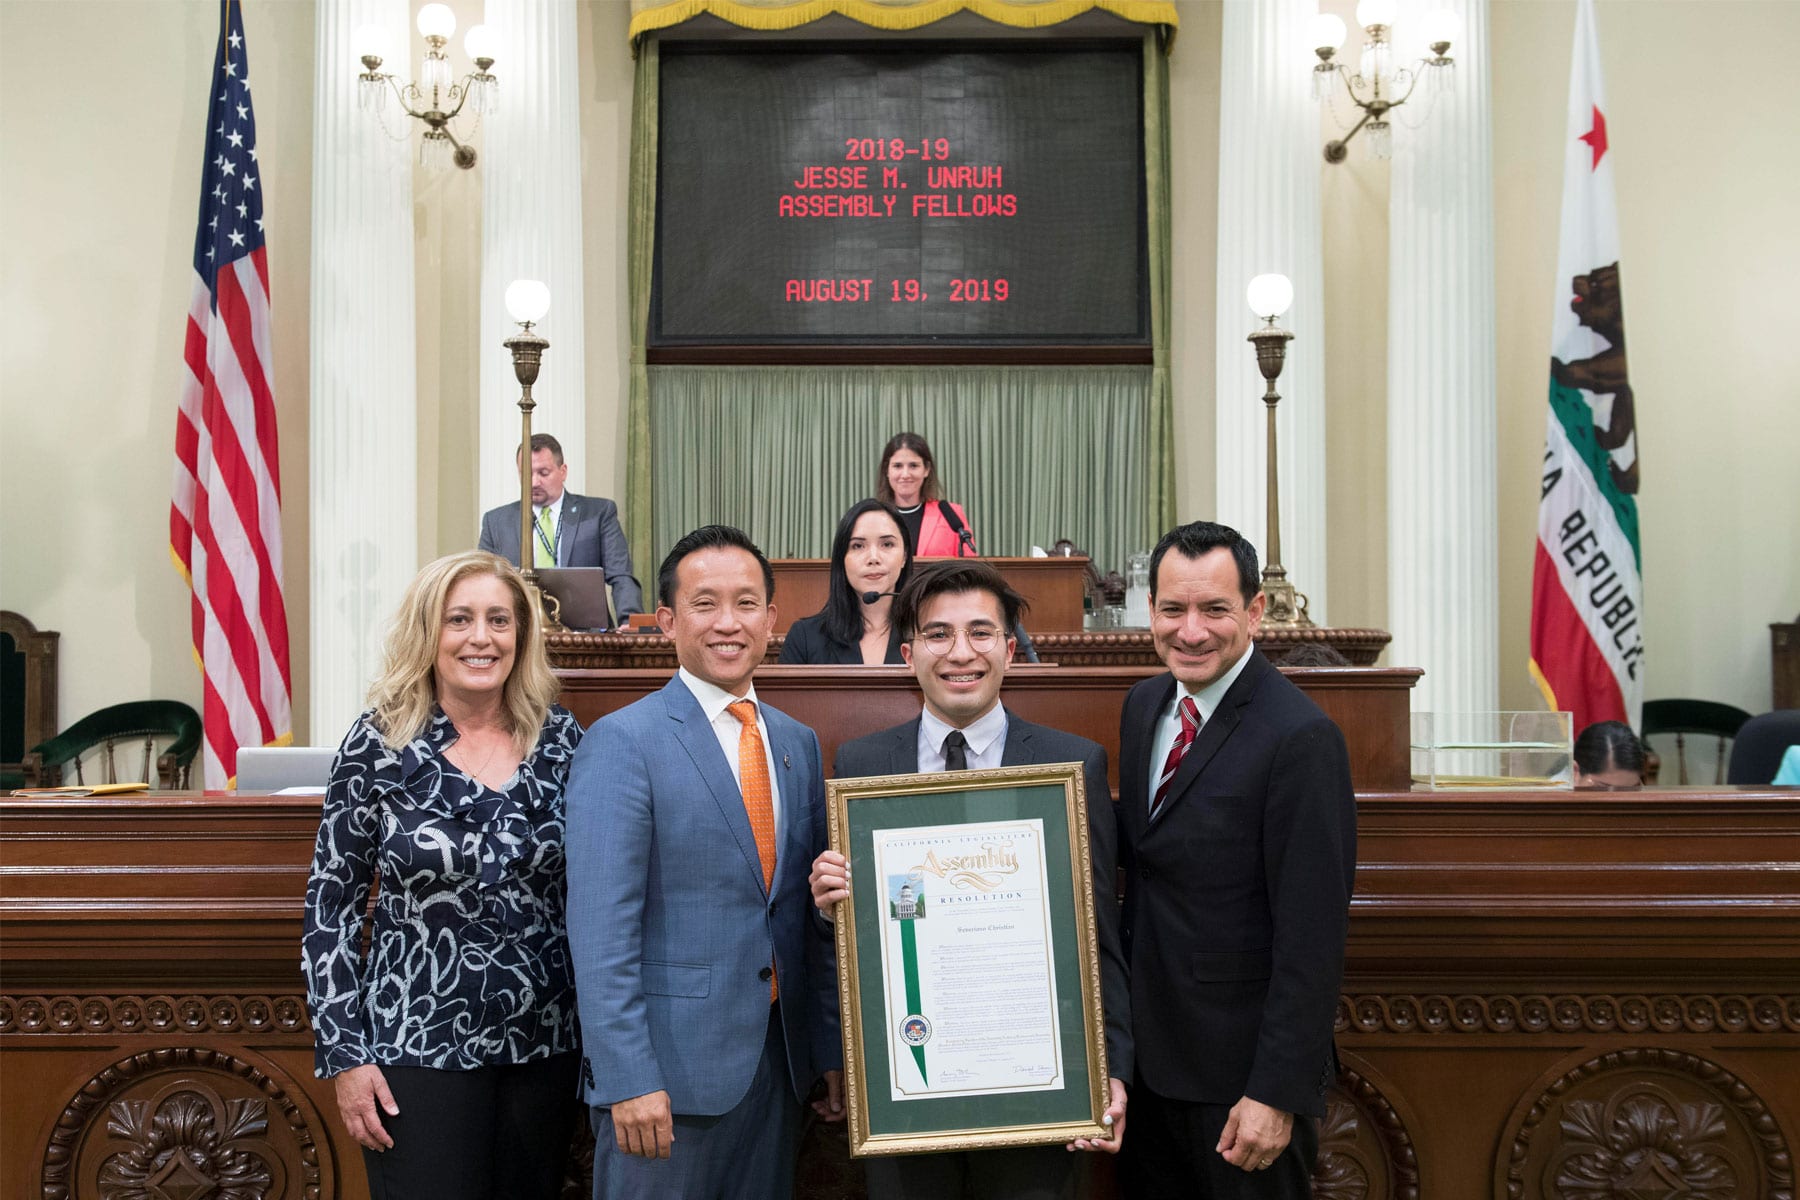 Severiano Christian standing in front of the chamber podium holding am assembly certificate with fellow assembly members.